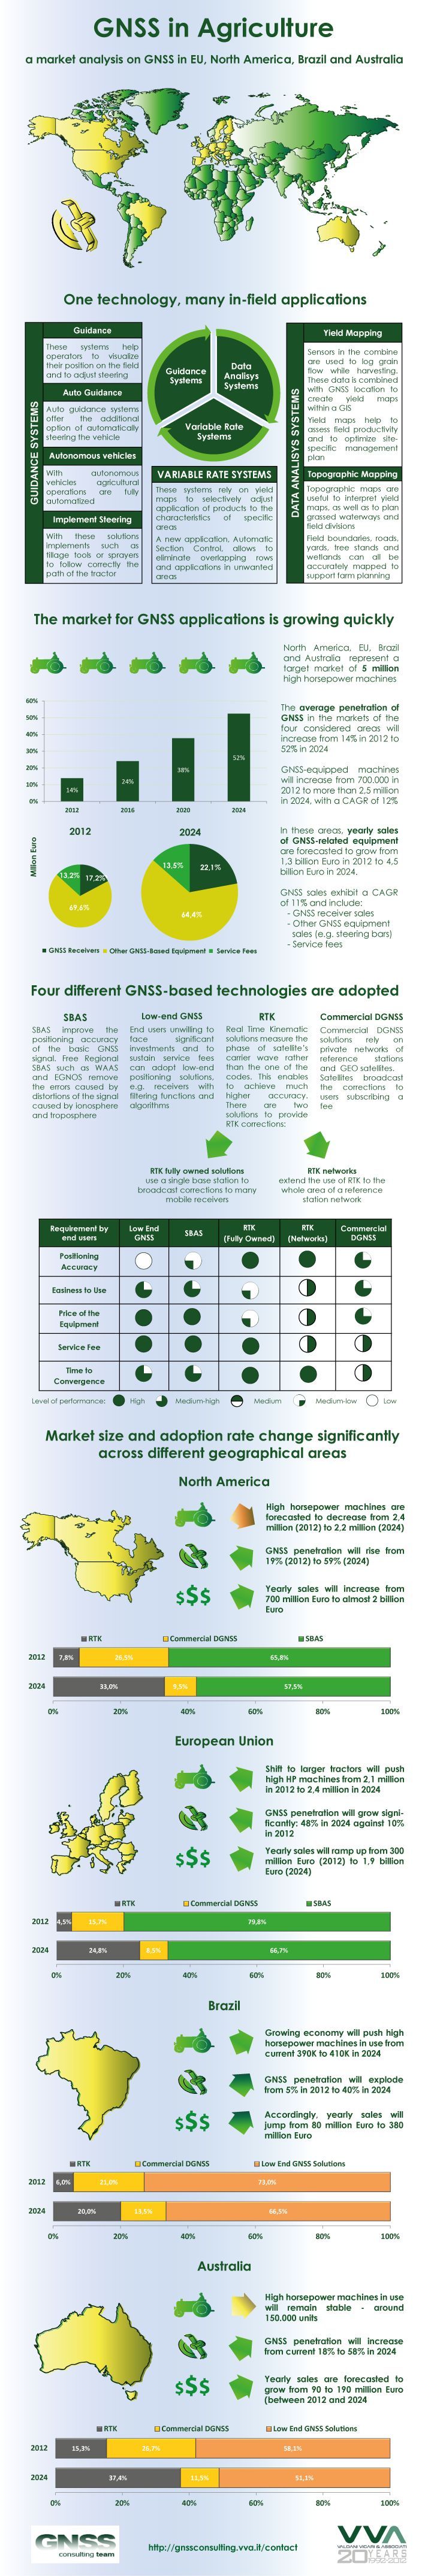 Drone Infographics : infographic about GNSS in agriculture market analysis nov. ...